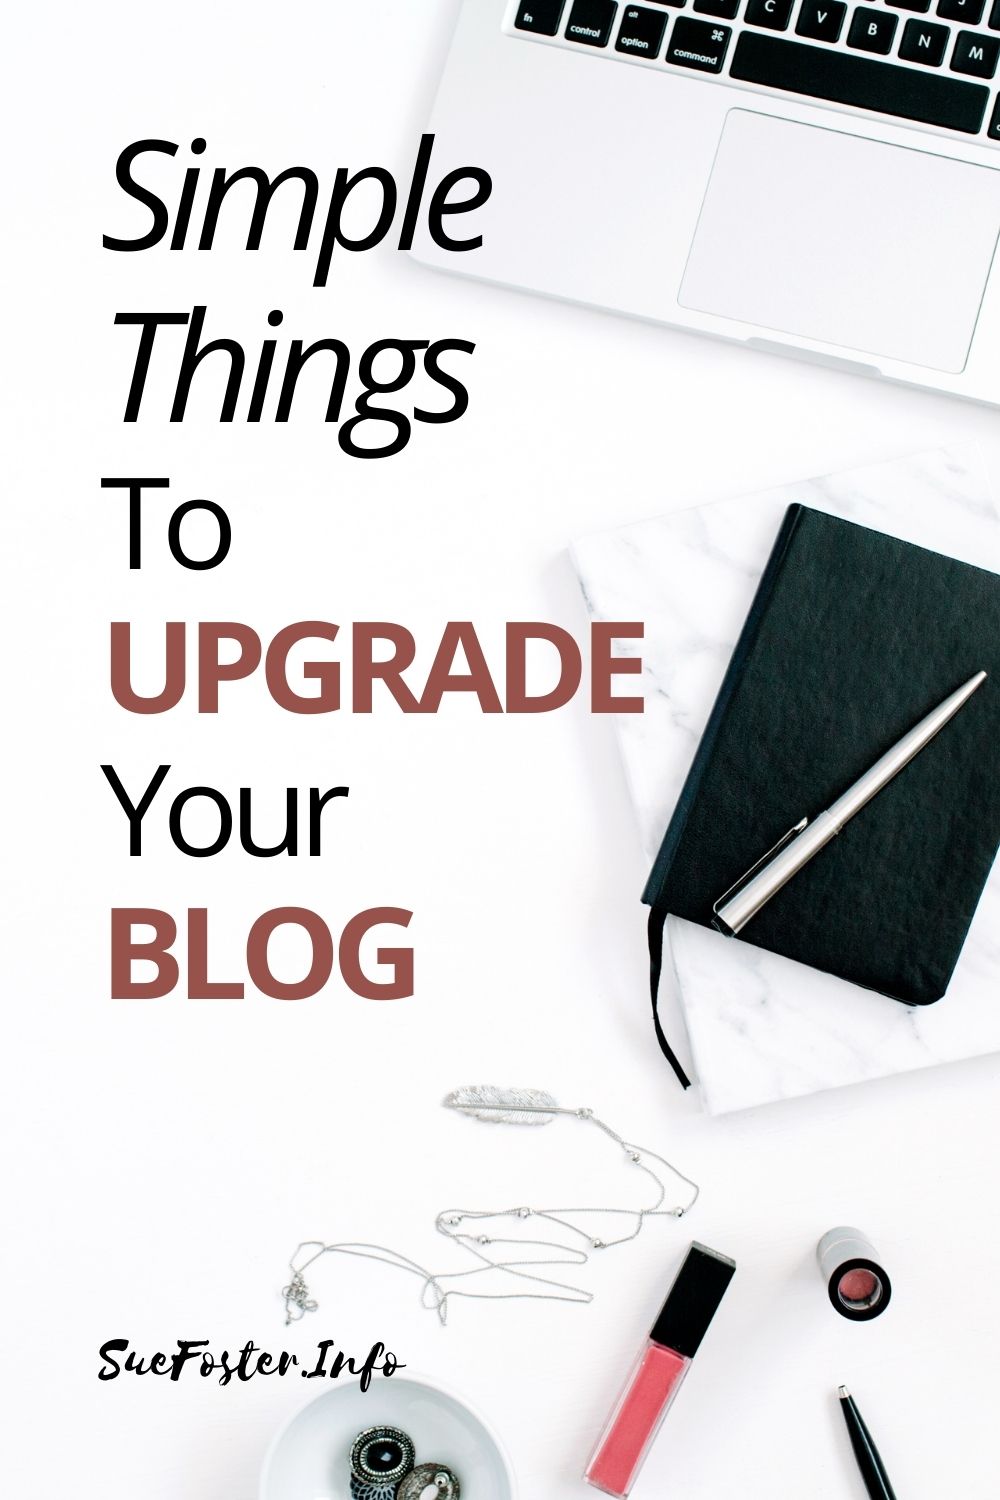 From Typeface to Its Face: Simple Things To Upgrade Your Blog